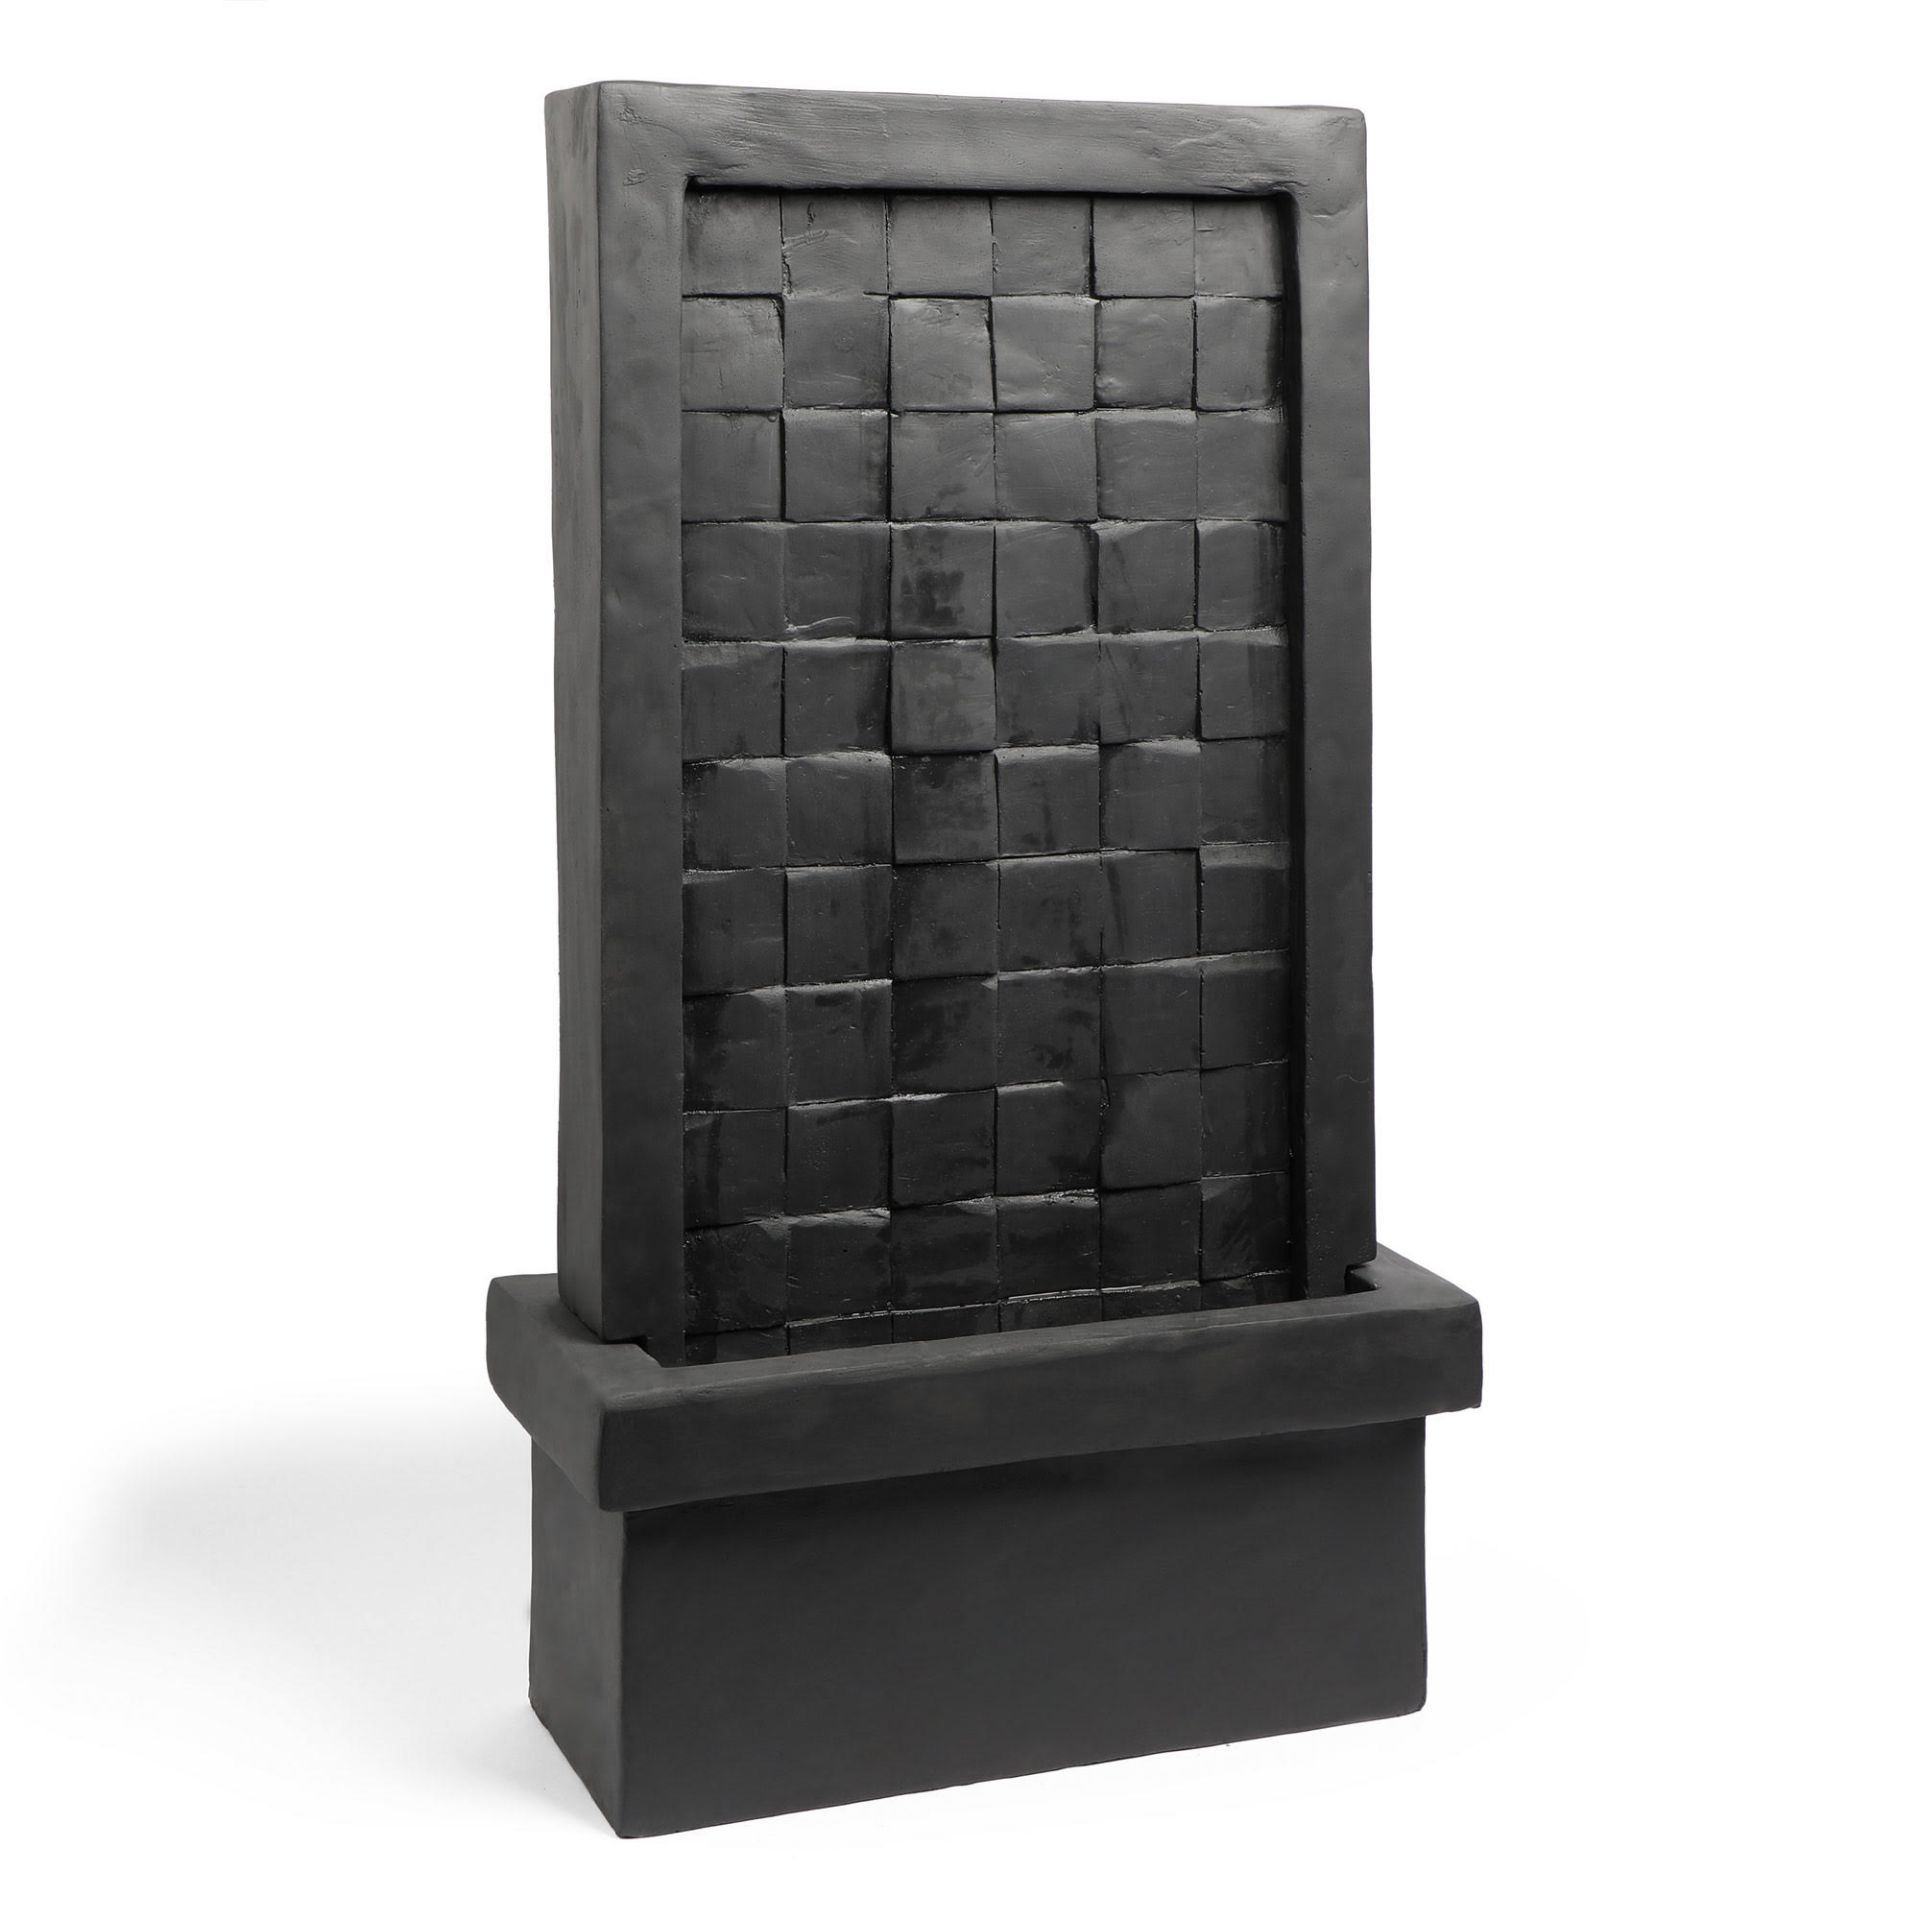 New & Boxed Tiled Waterfall Water Feature - Tall LED Wall Lit Cascading Water Fountain. RRP £349.99. - Image 4 of 6